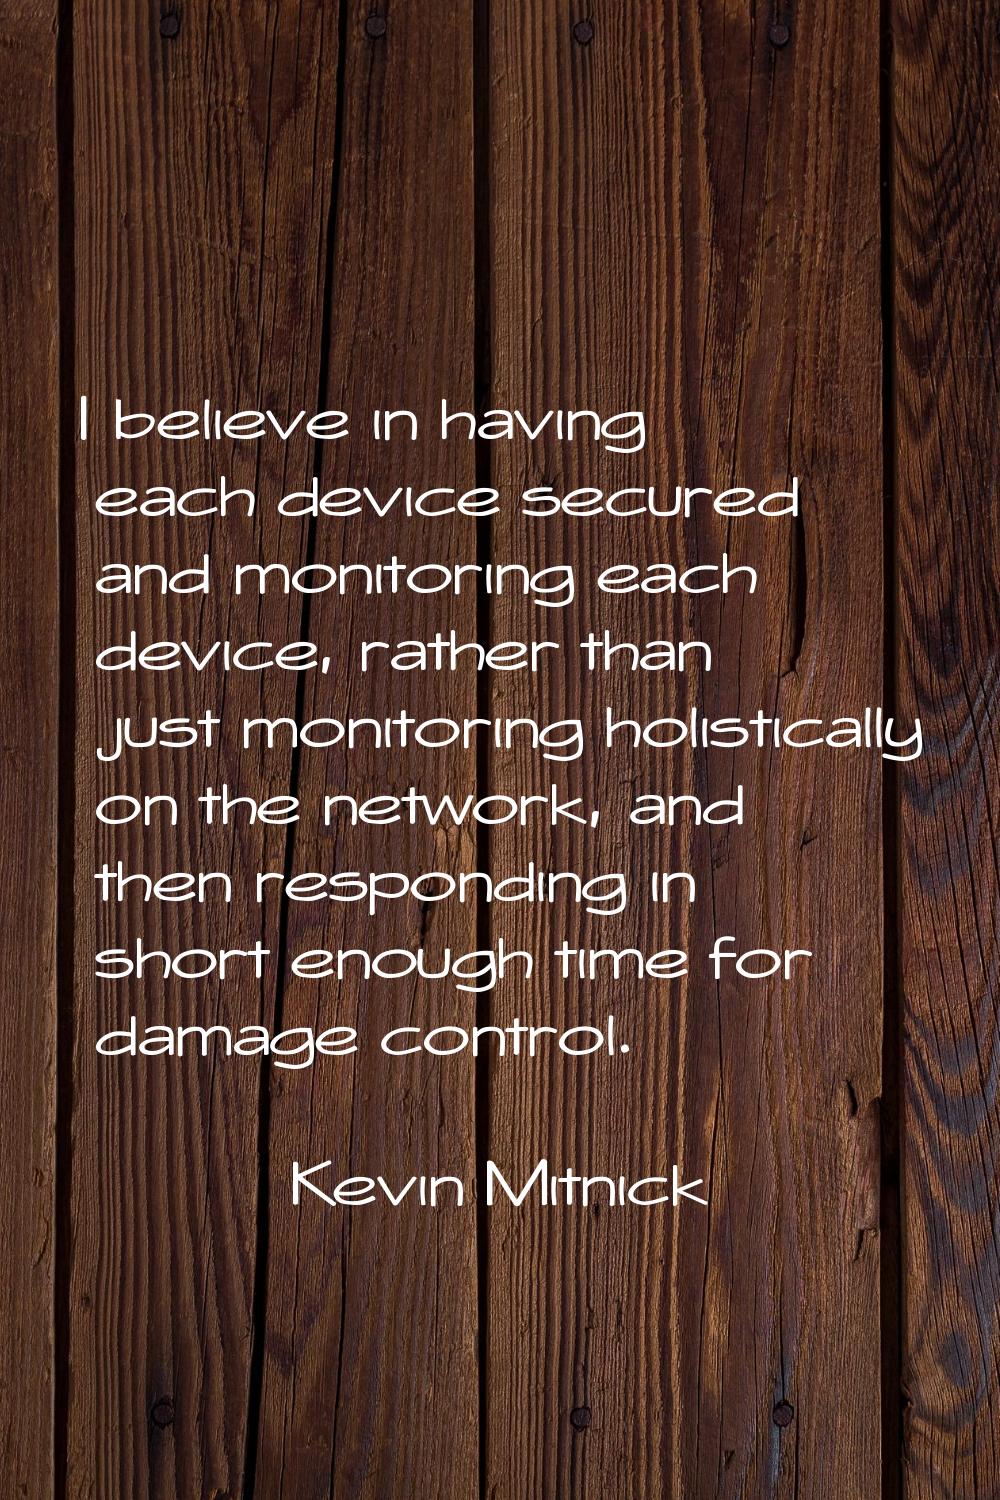 I believe in having each device secured and monitoring each device, rather than just monitoring hol